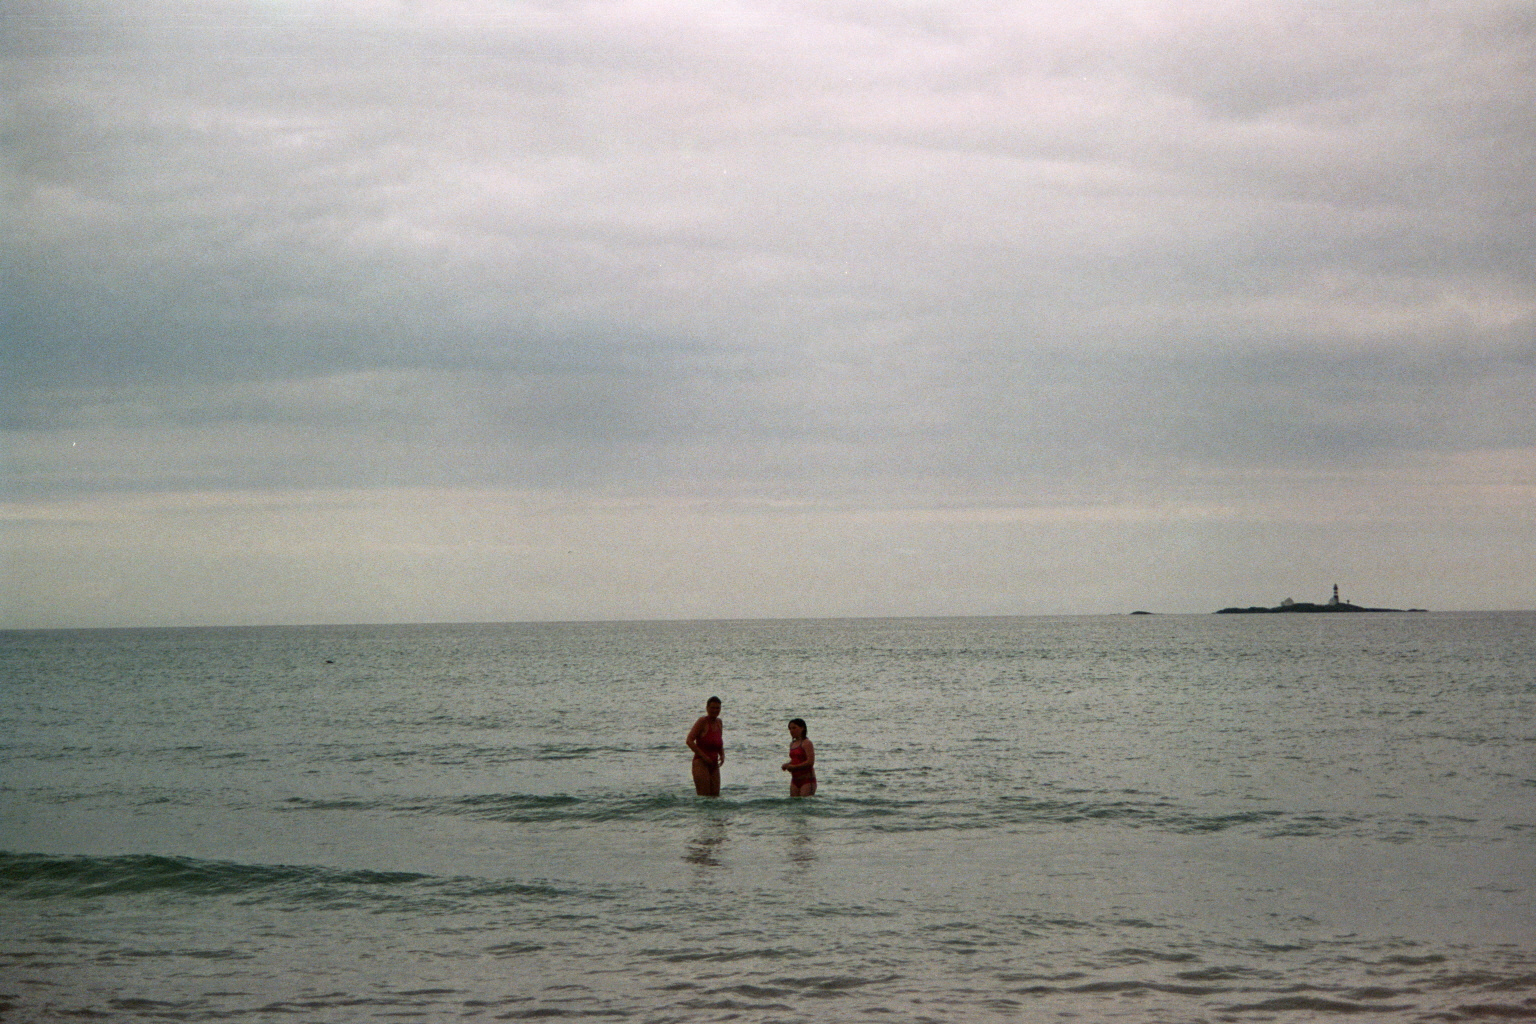 two people in the ocean on an overcast day